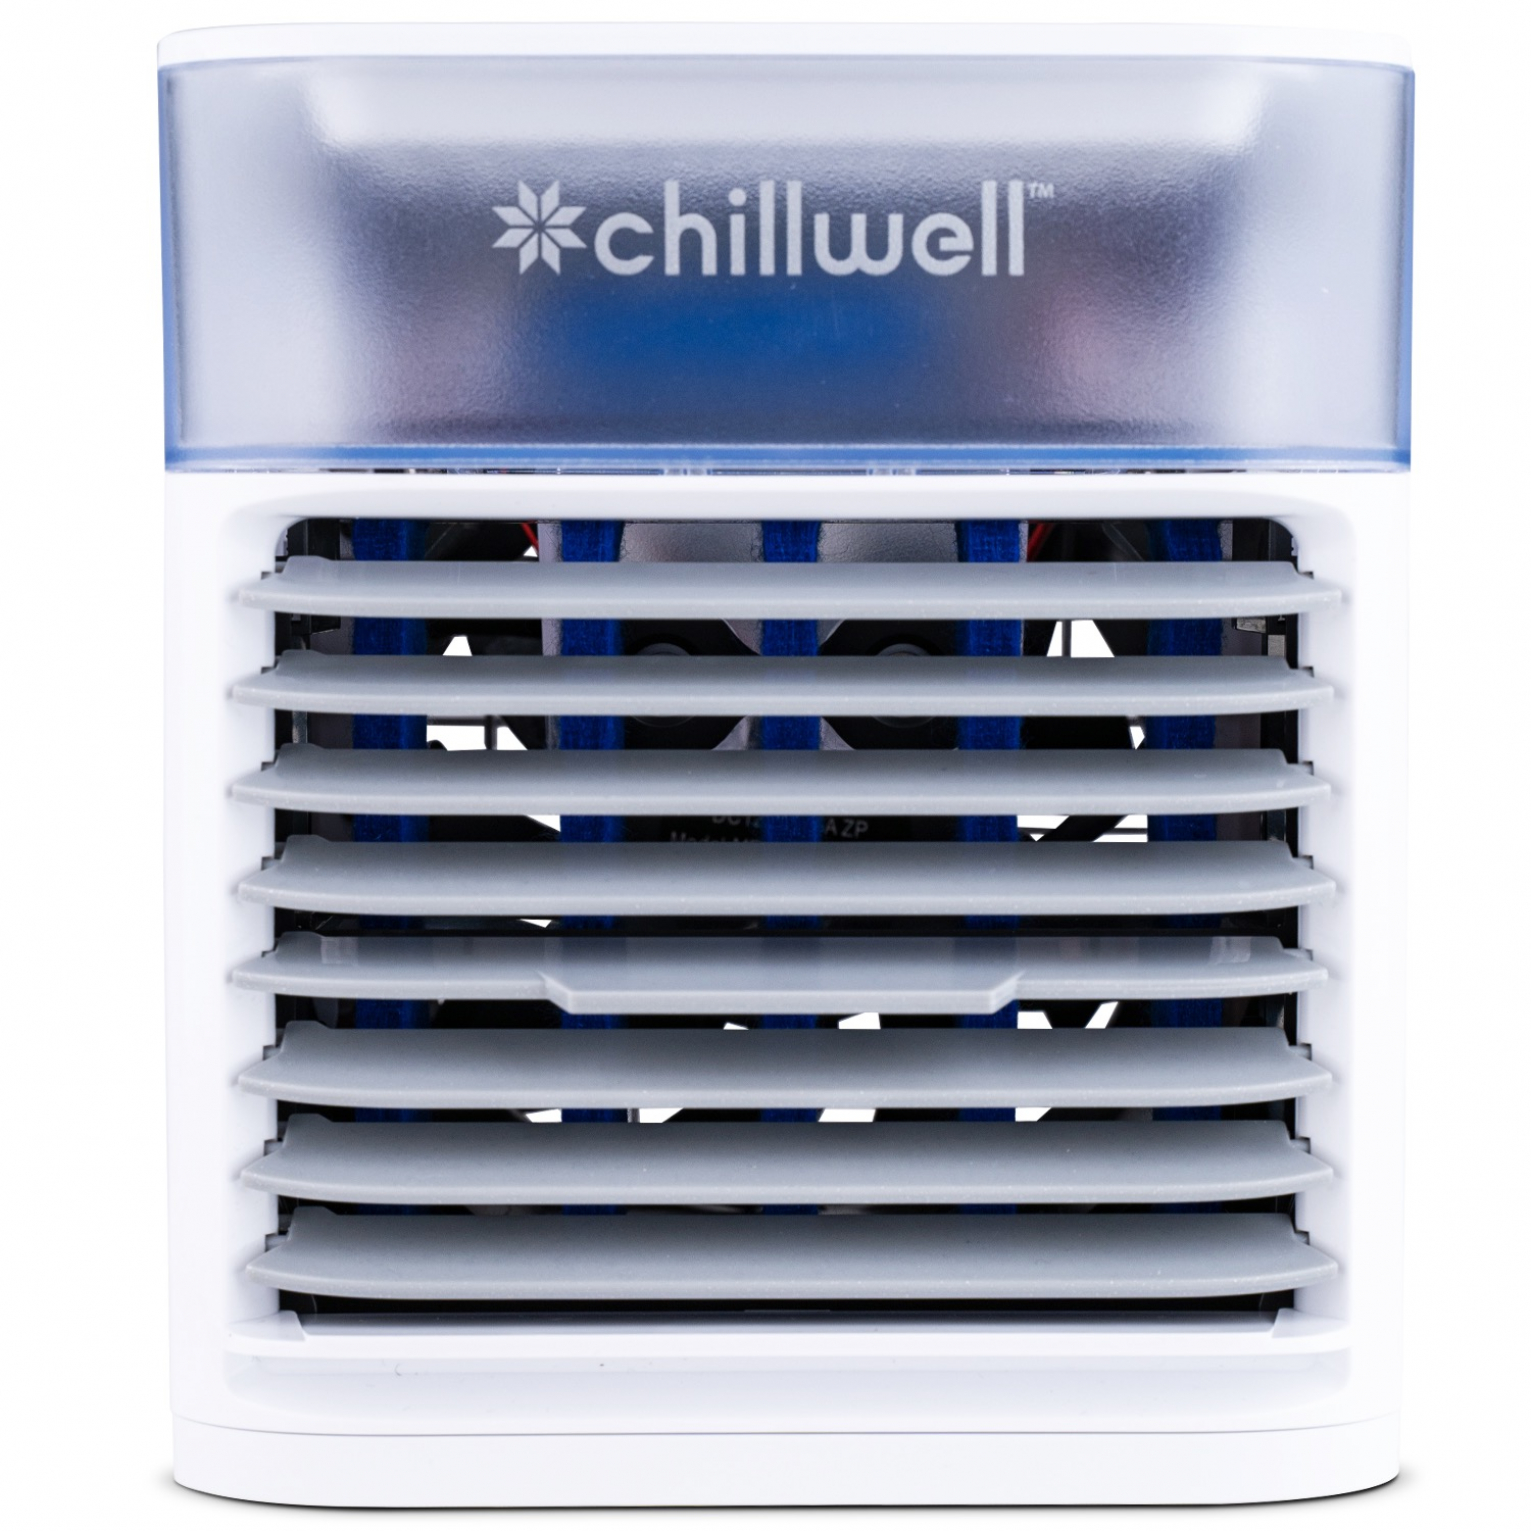 Chillwell AC Tower Pure Evaporative Cooler